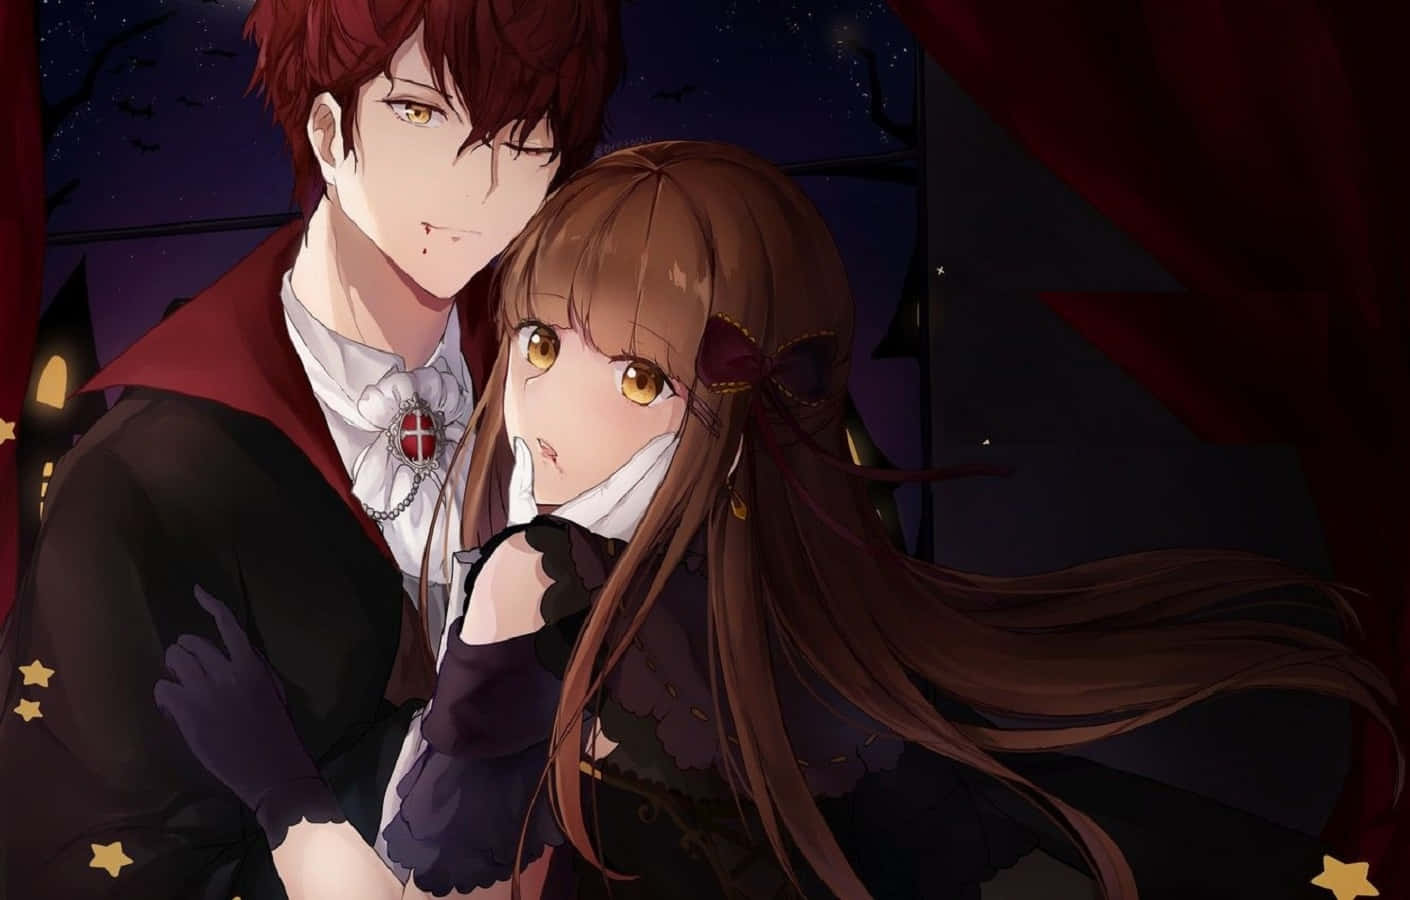 Mysterious Vampire Couple in Costume Wallpaper